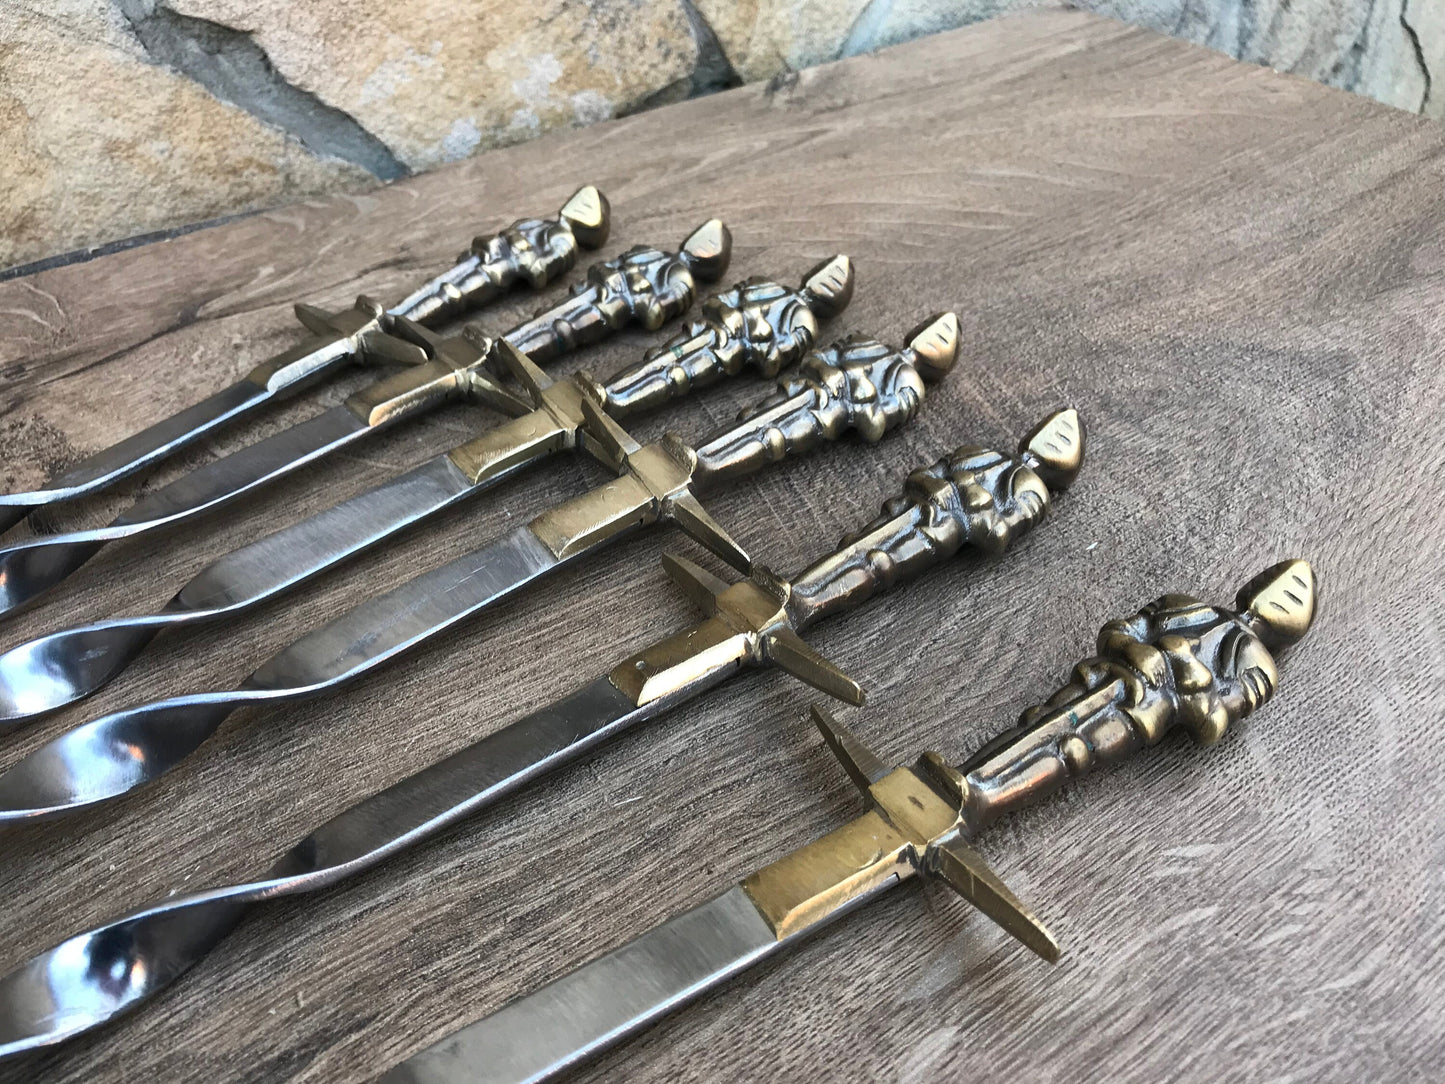 Skewers, picnic, viking, knight, grill tools, pricker, Middle Ages, camping, medieval, anniversary, retirement, fireplace,gift for mom,daddy